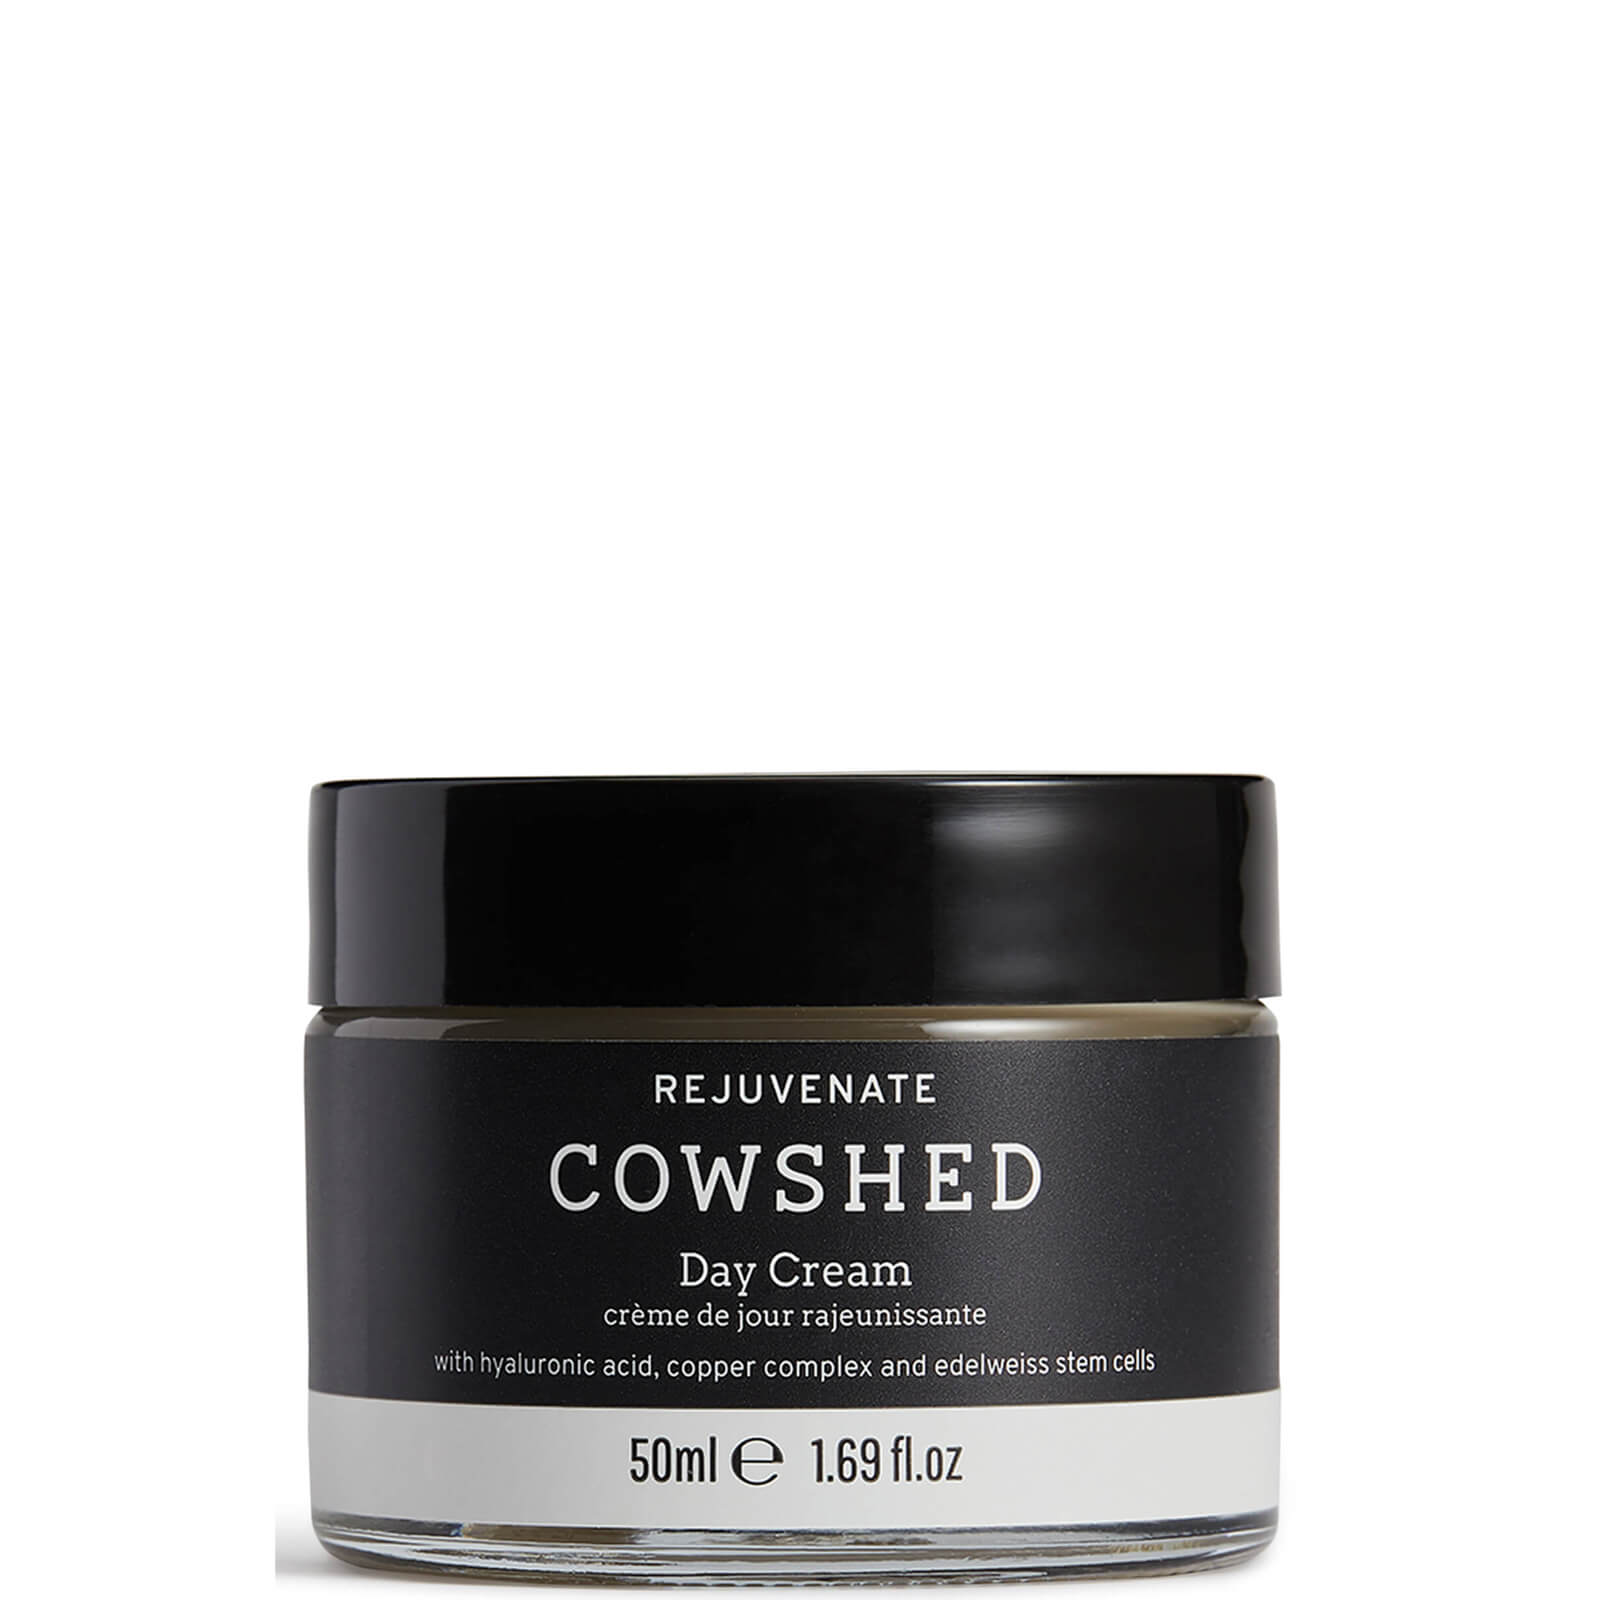 Image of Cowshed Rejuvenate Day Cream 50ml